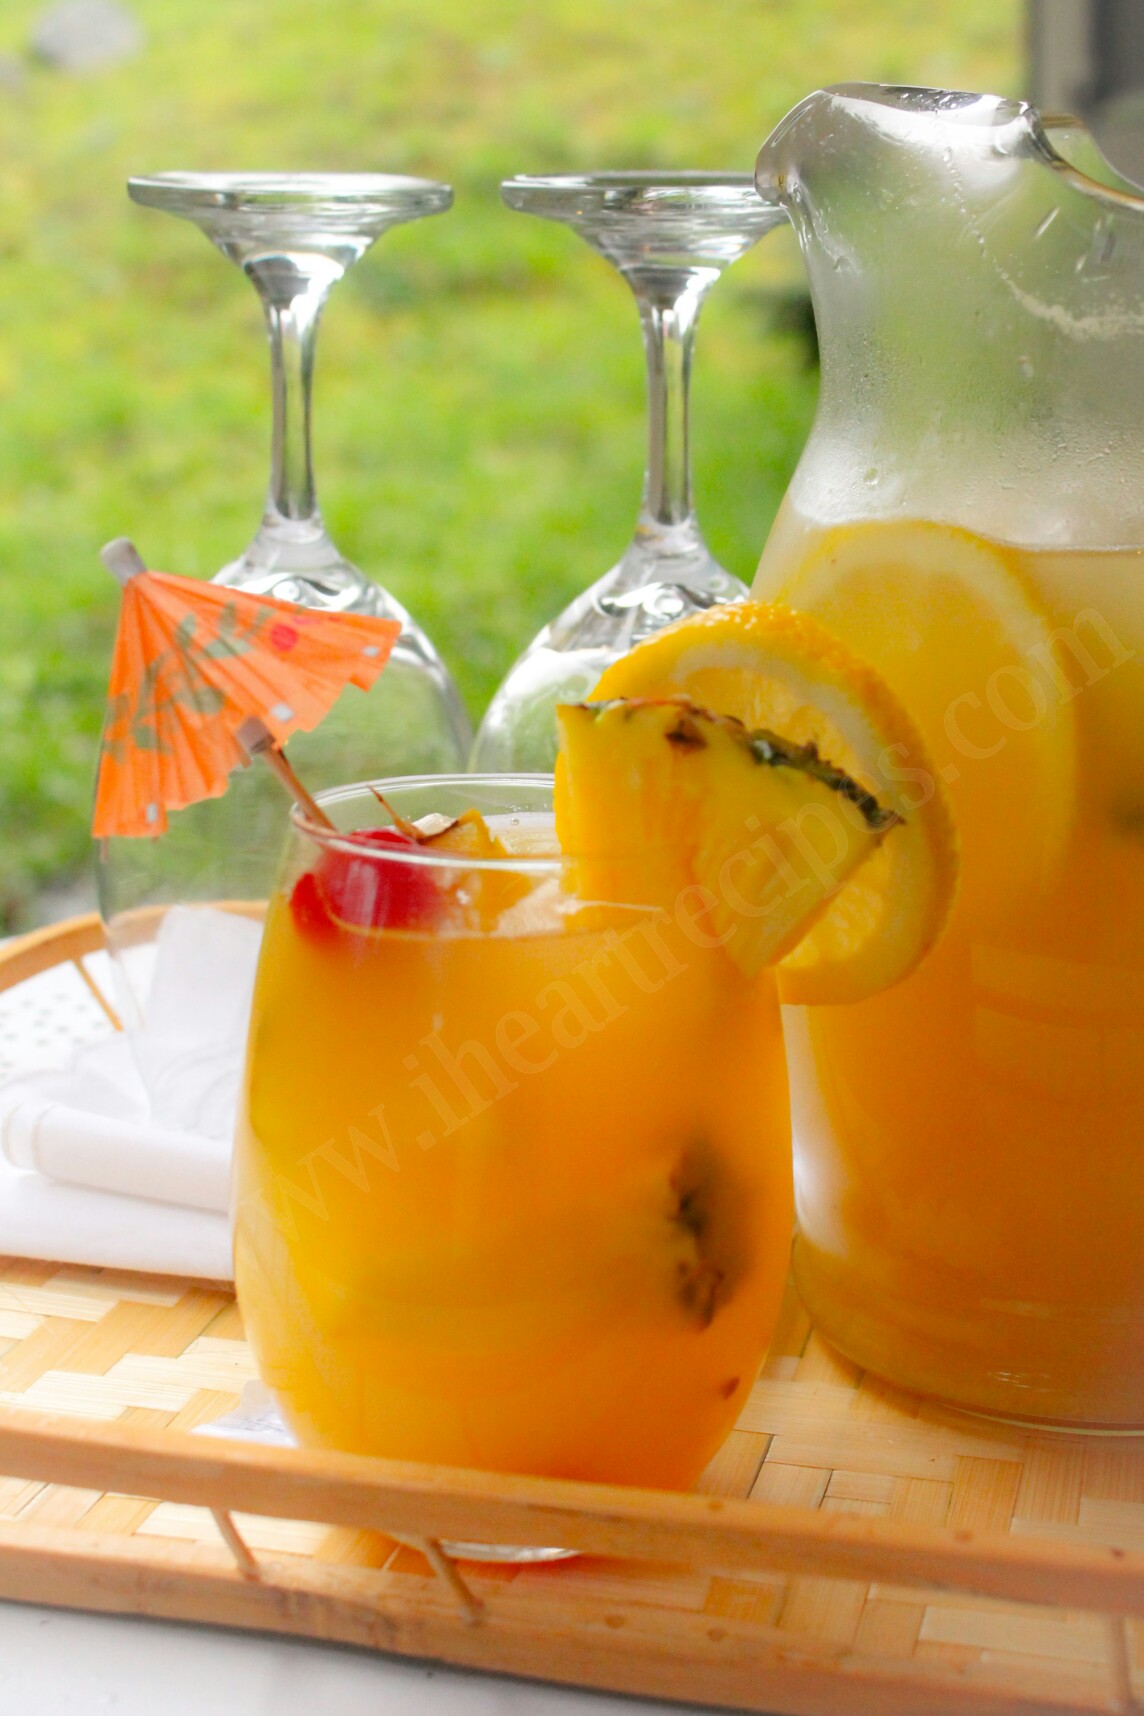 Use ripe fruit for the most flavorful mango lemonade